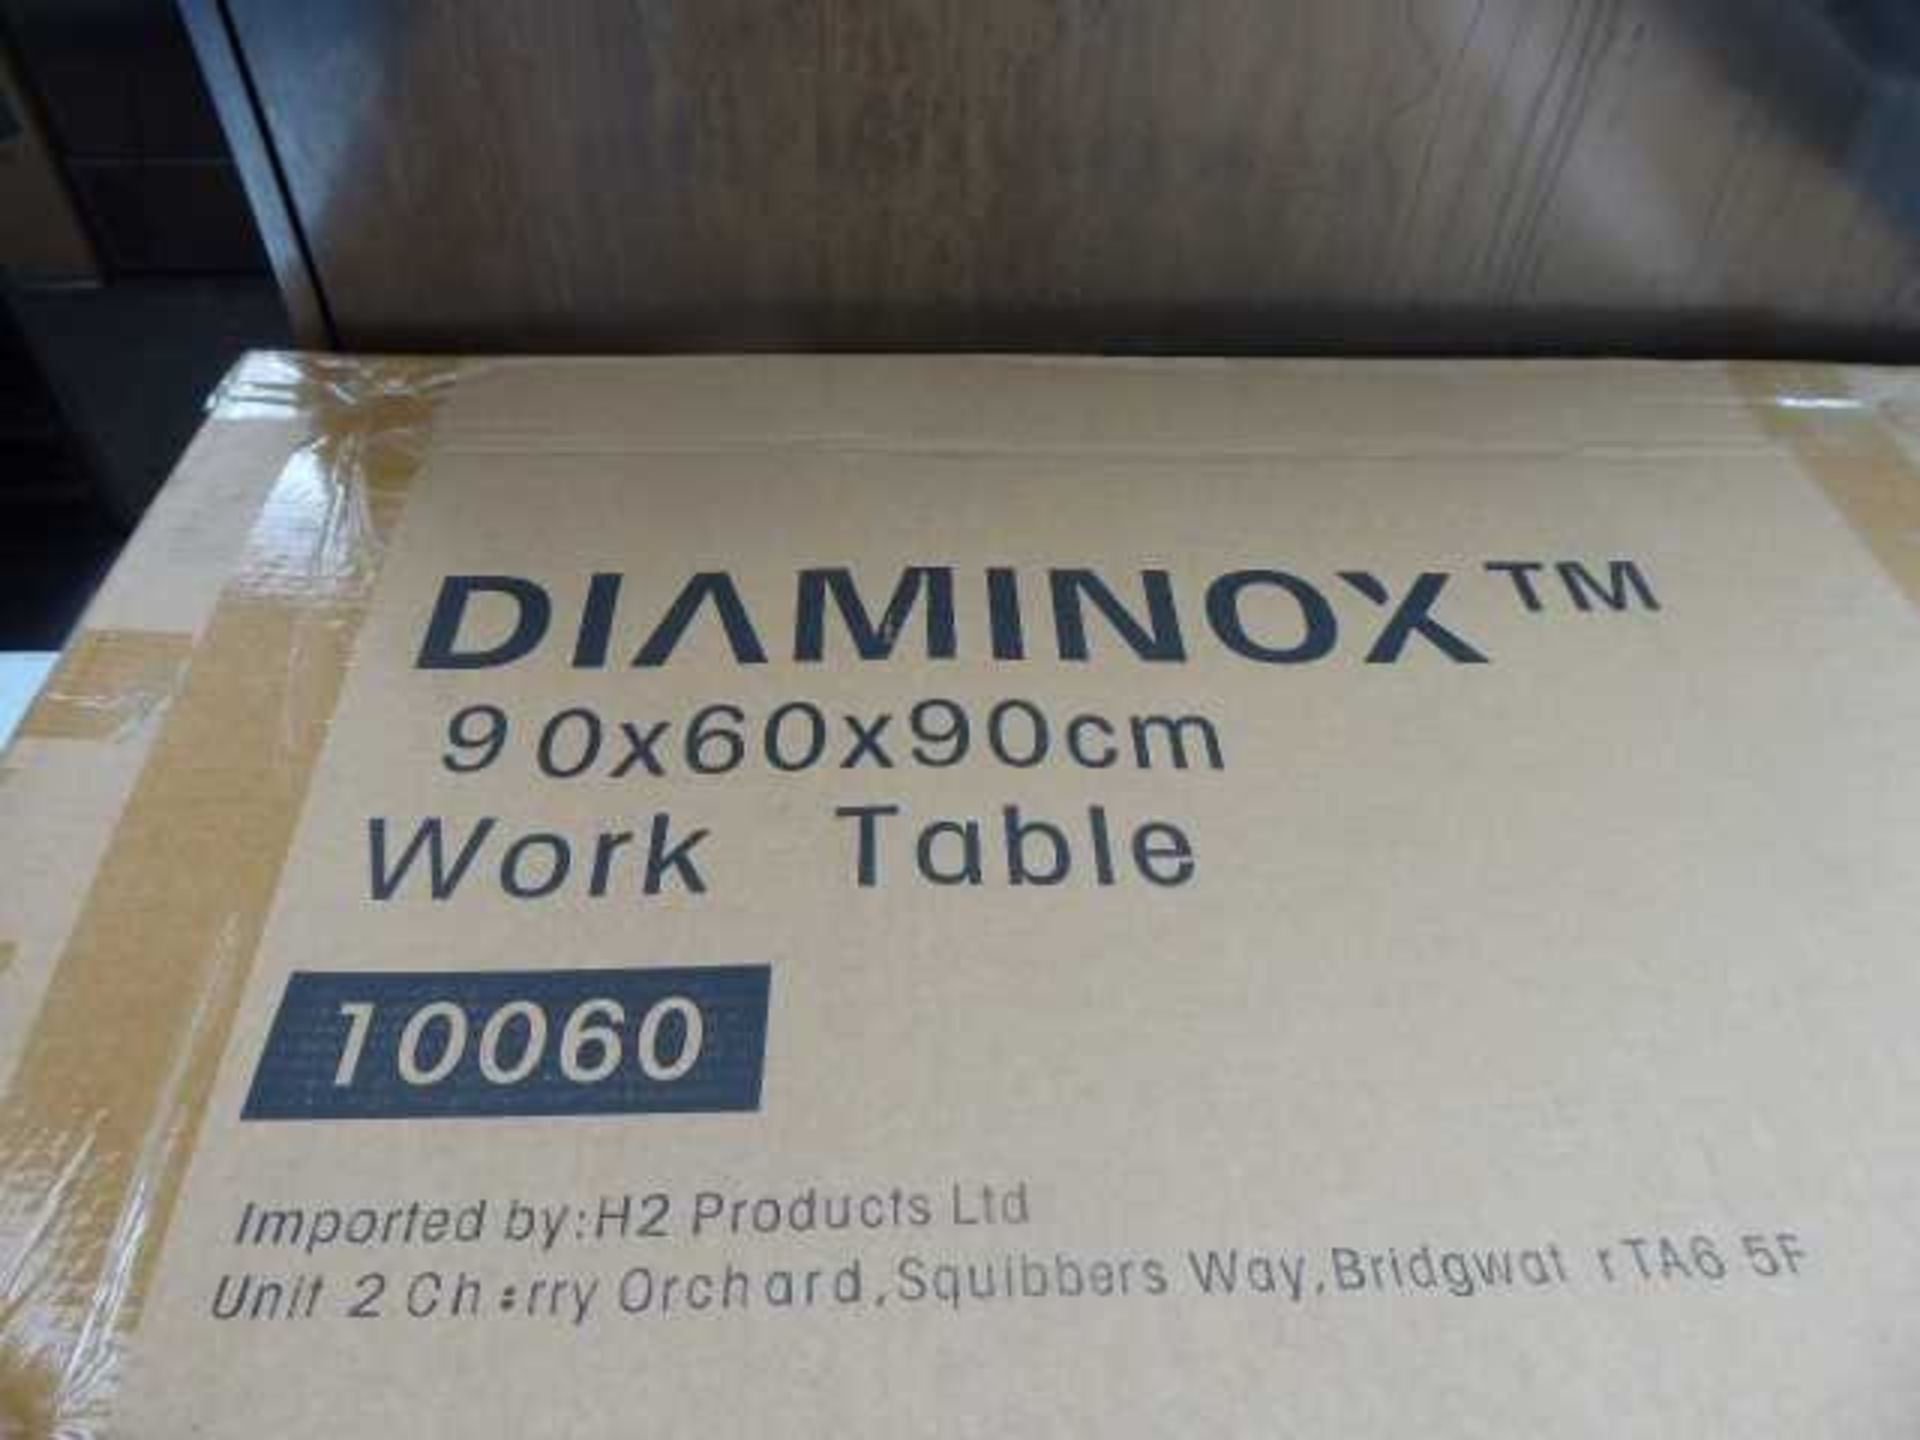 +VAT 90cm Diaminox stainless steel preparation table with shelf under (Flat pack) - Image 2 of 2